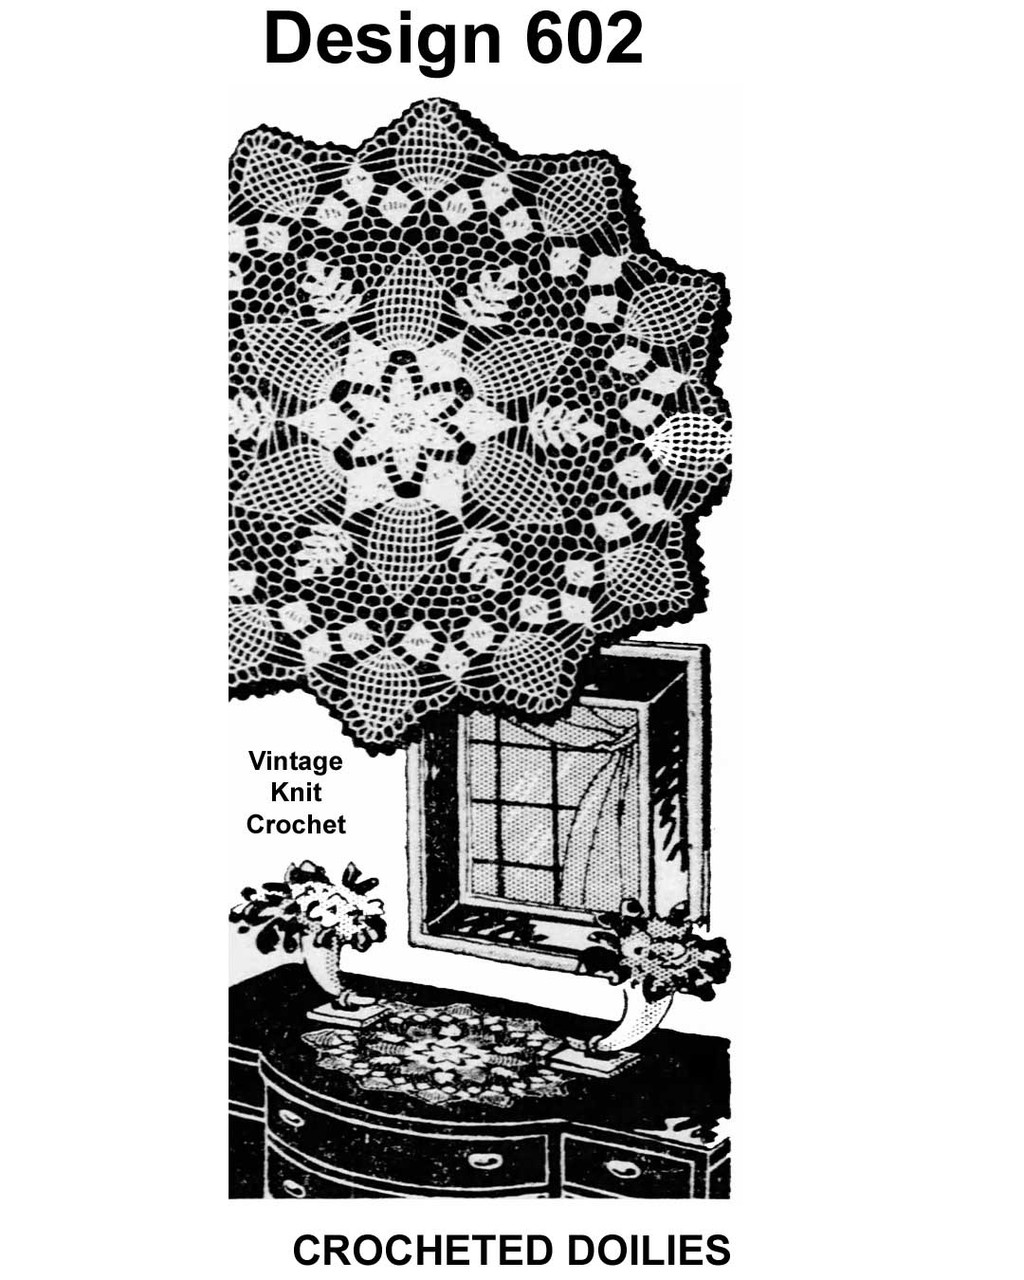 Crochet Fern Doilies Pattern, Small Large, Mail Order Design 602